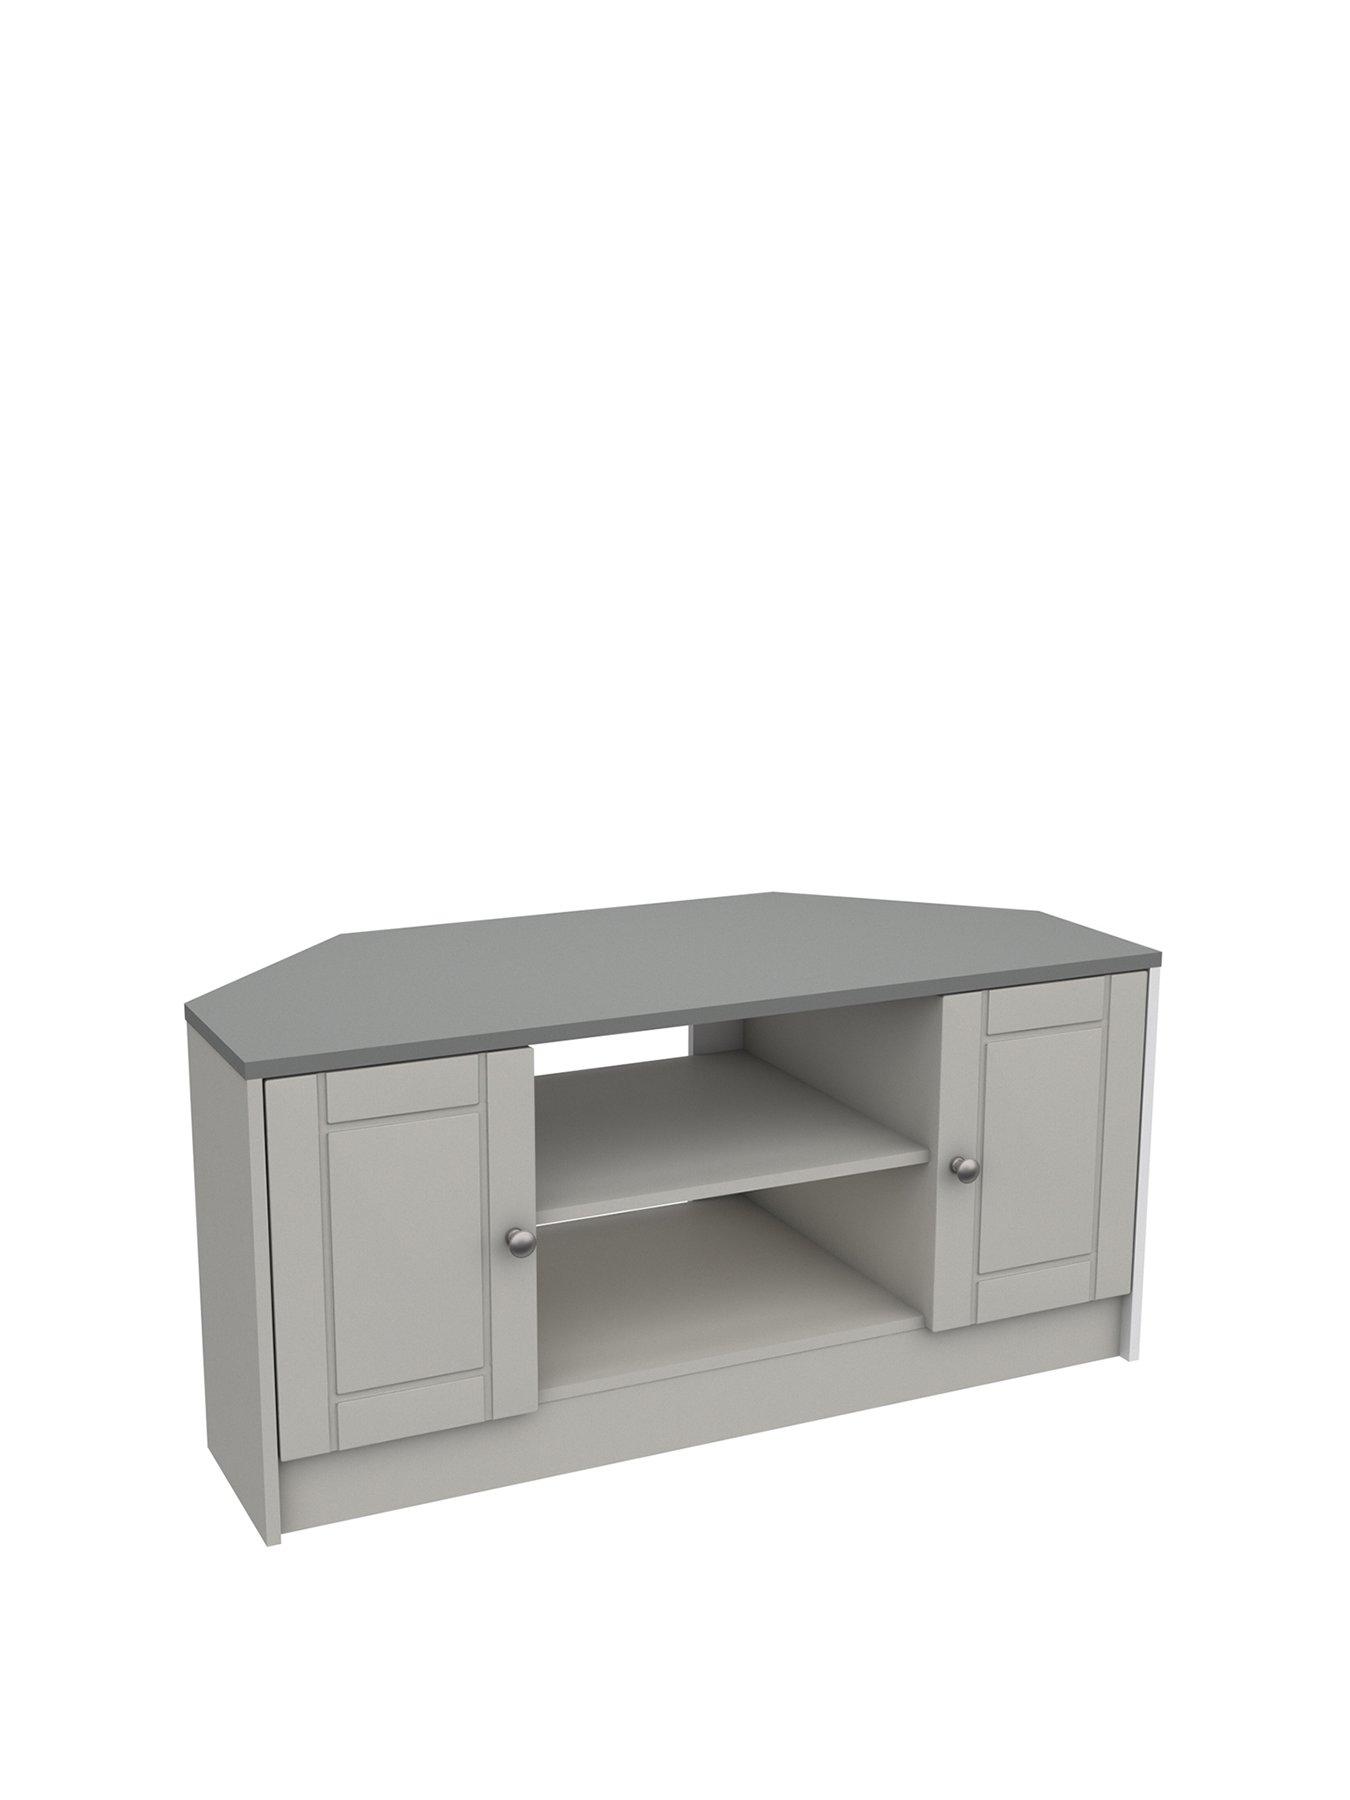 One Call Alderley Ready Assembled Corner Tv Unit Up To 48 Inch - Grey |  Very.Co.Uk